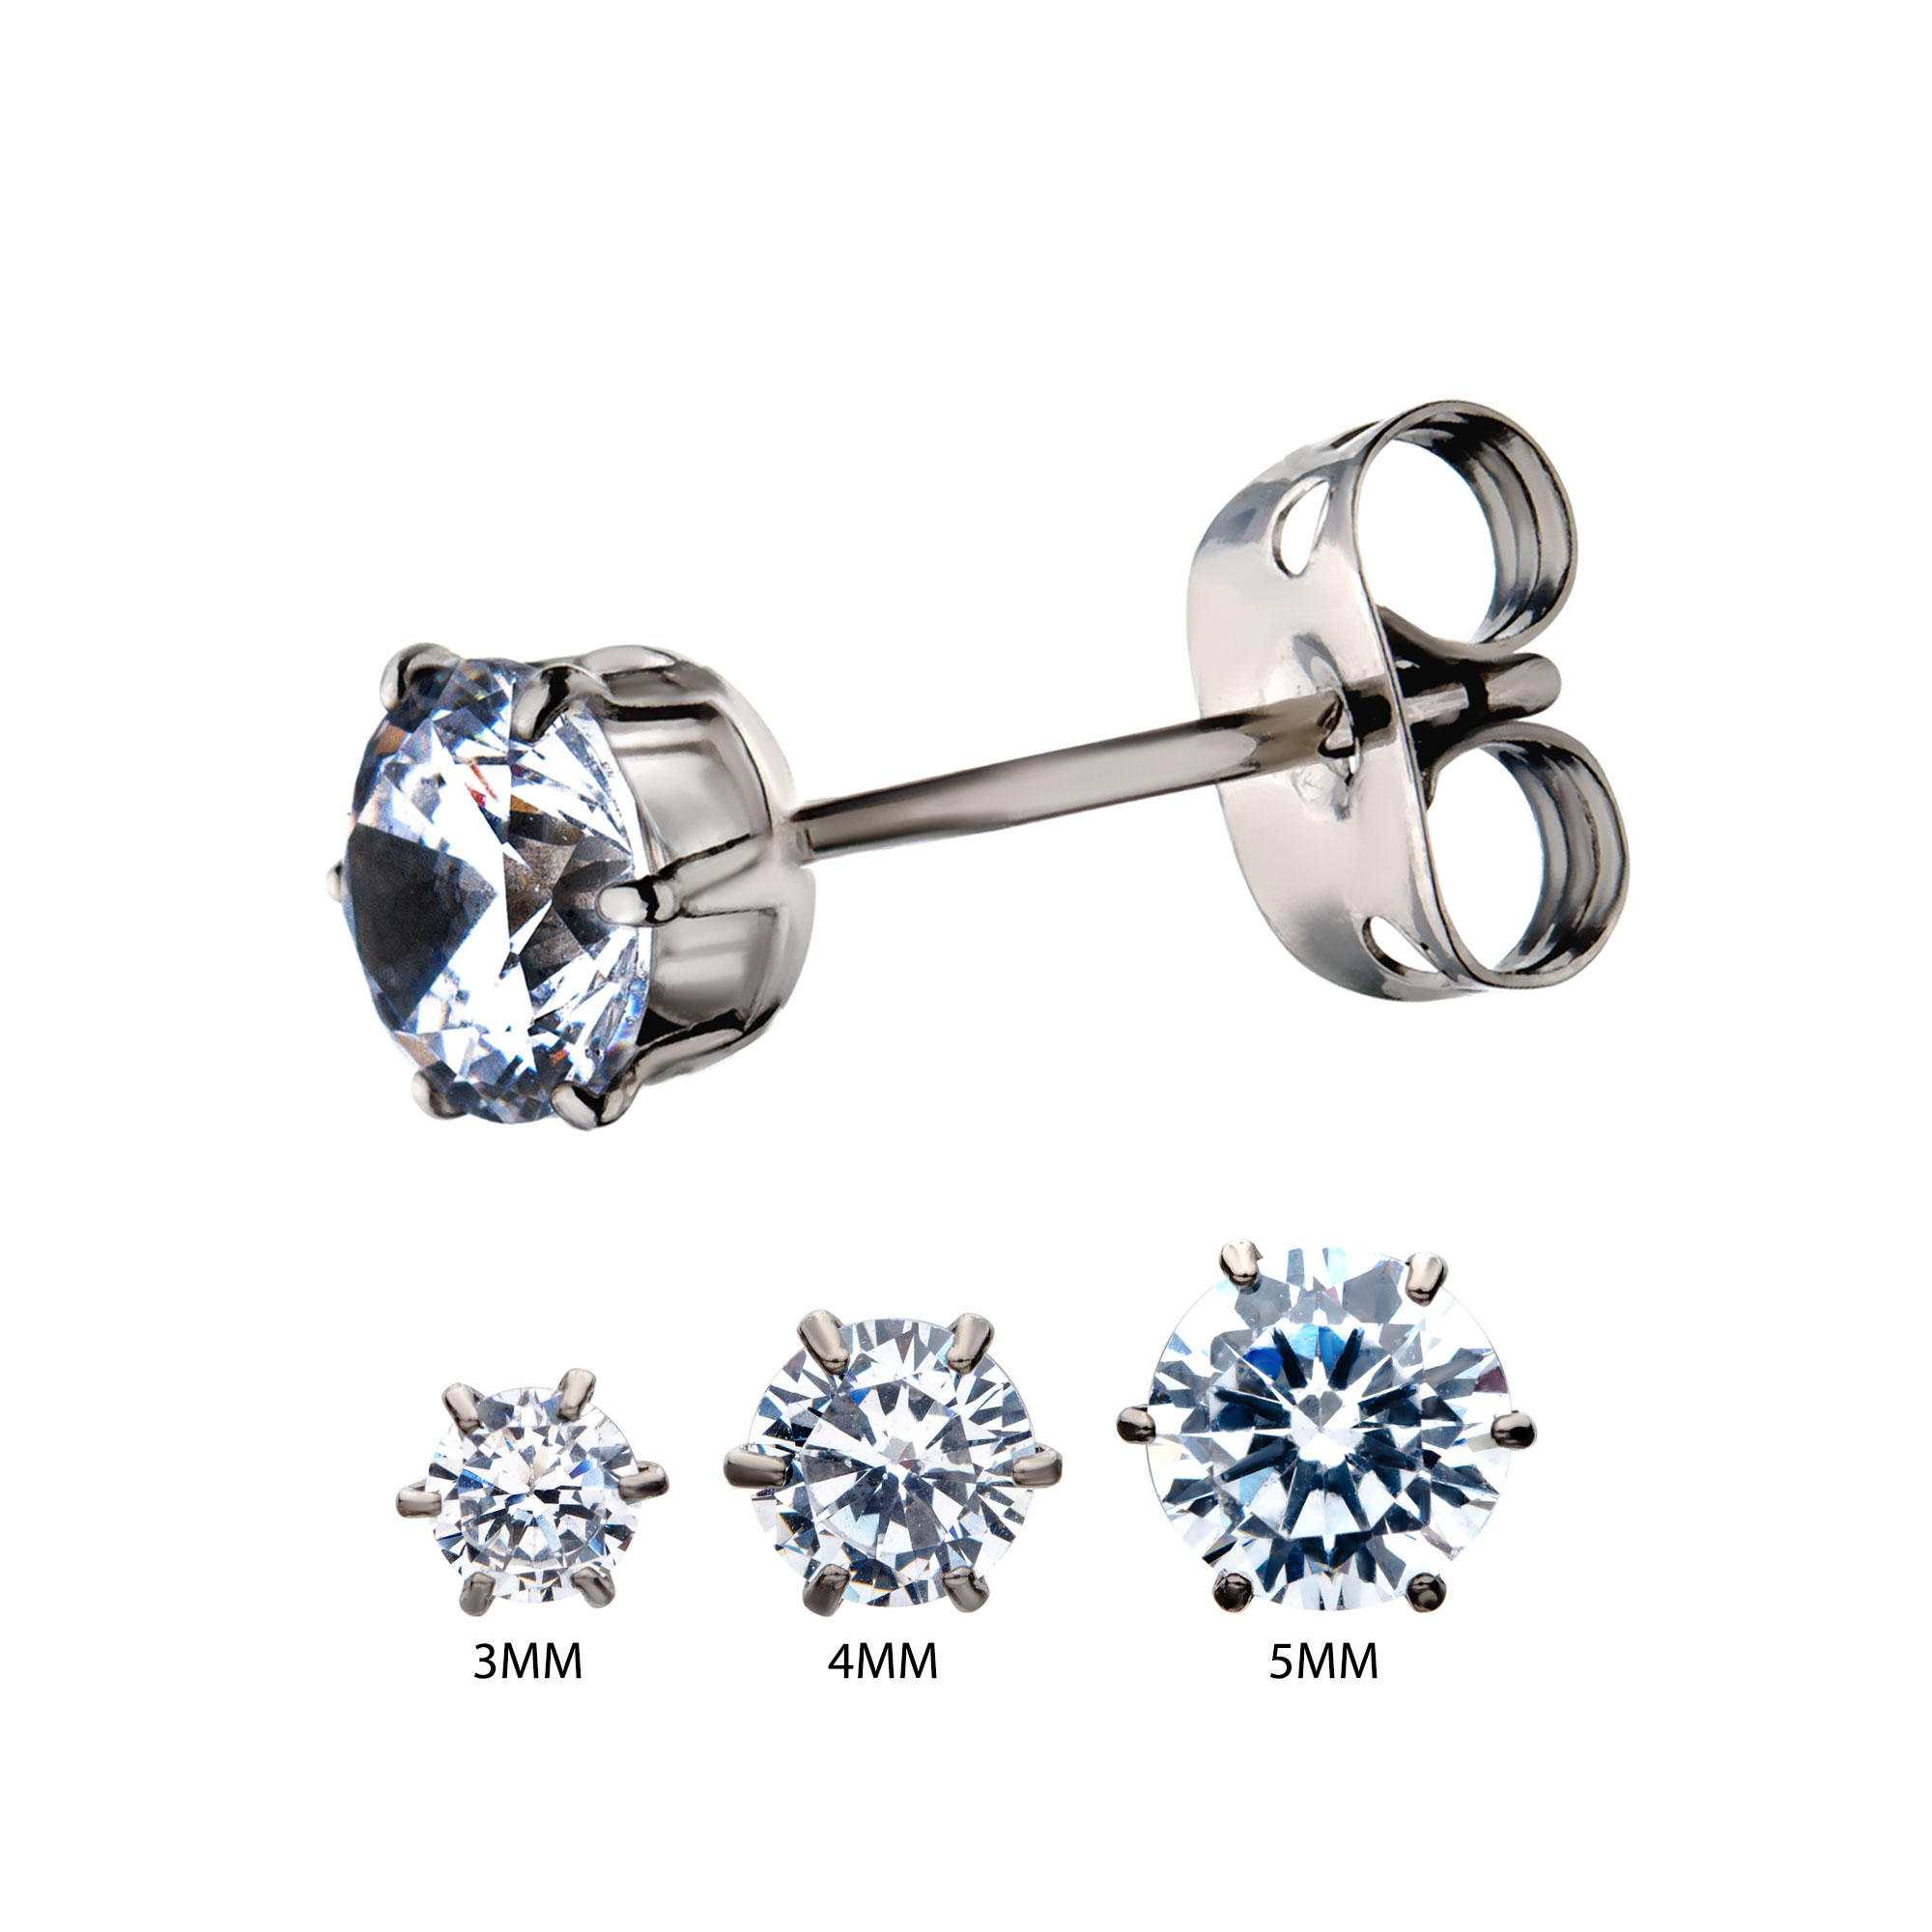 20g Titanium Post and Butterfly Back with Prong Set CZ Stud Earrings Jayson Jewelers Cape Girardeau, MO